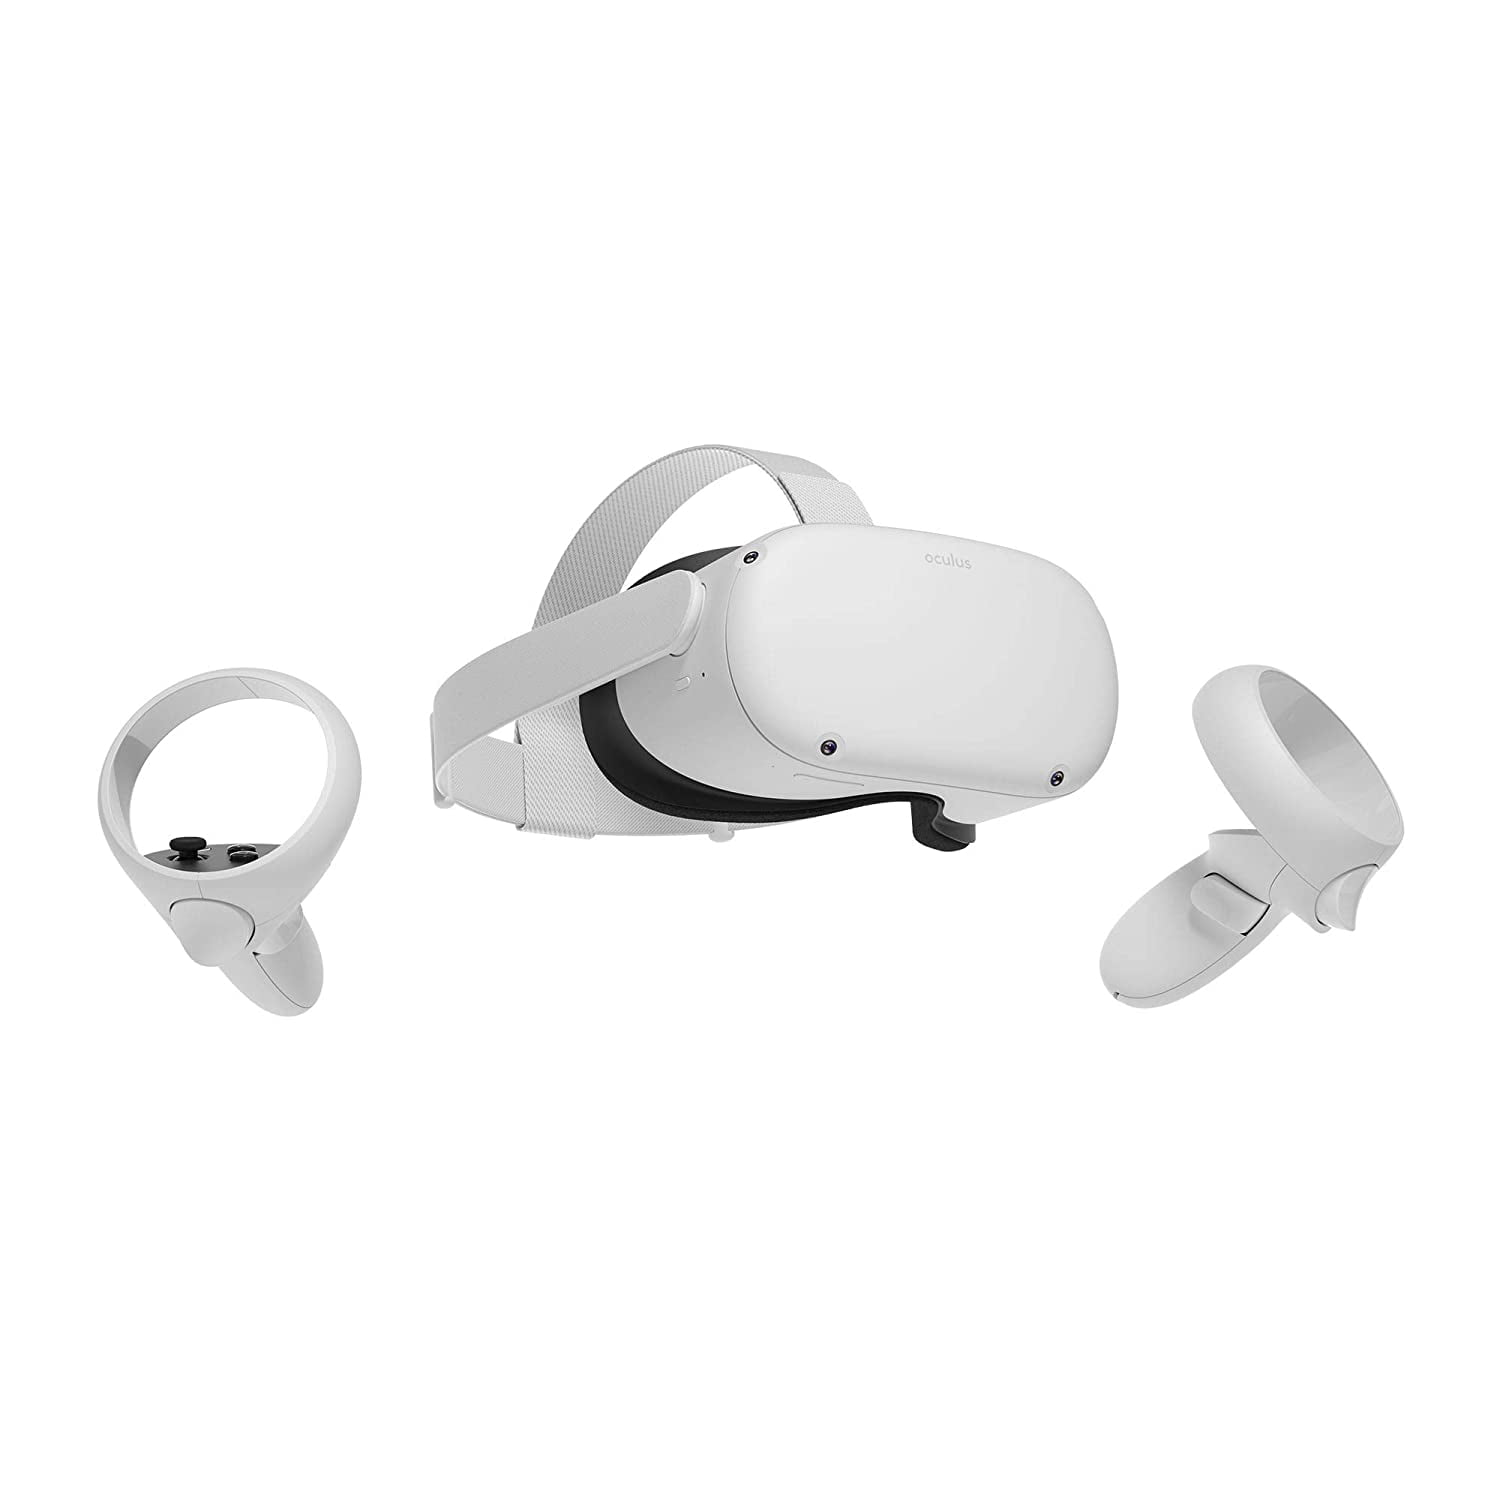 Meta Oculus Quest 2 - Advanced All-In-One Virtual Reality Headset - 64GB  with 2 Touch Controllers